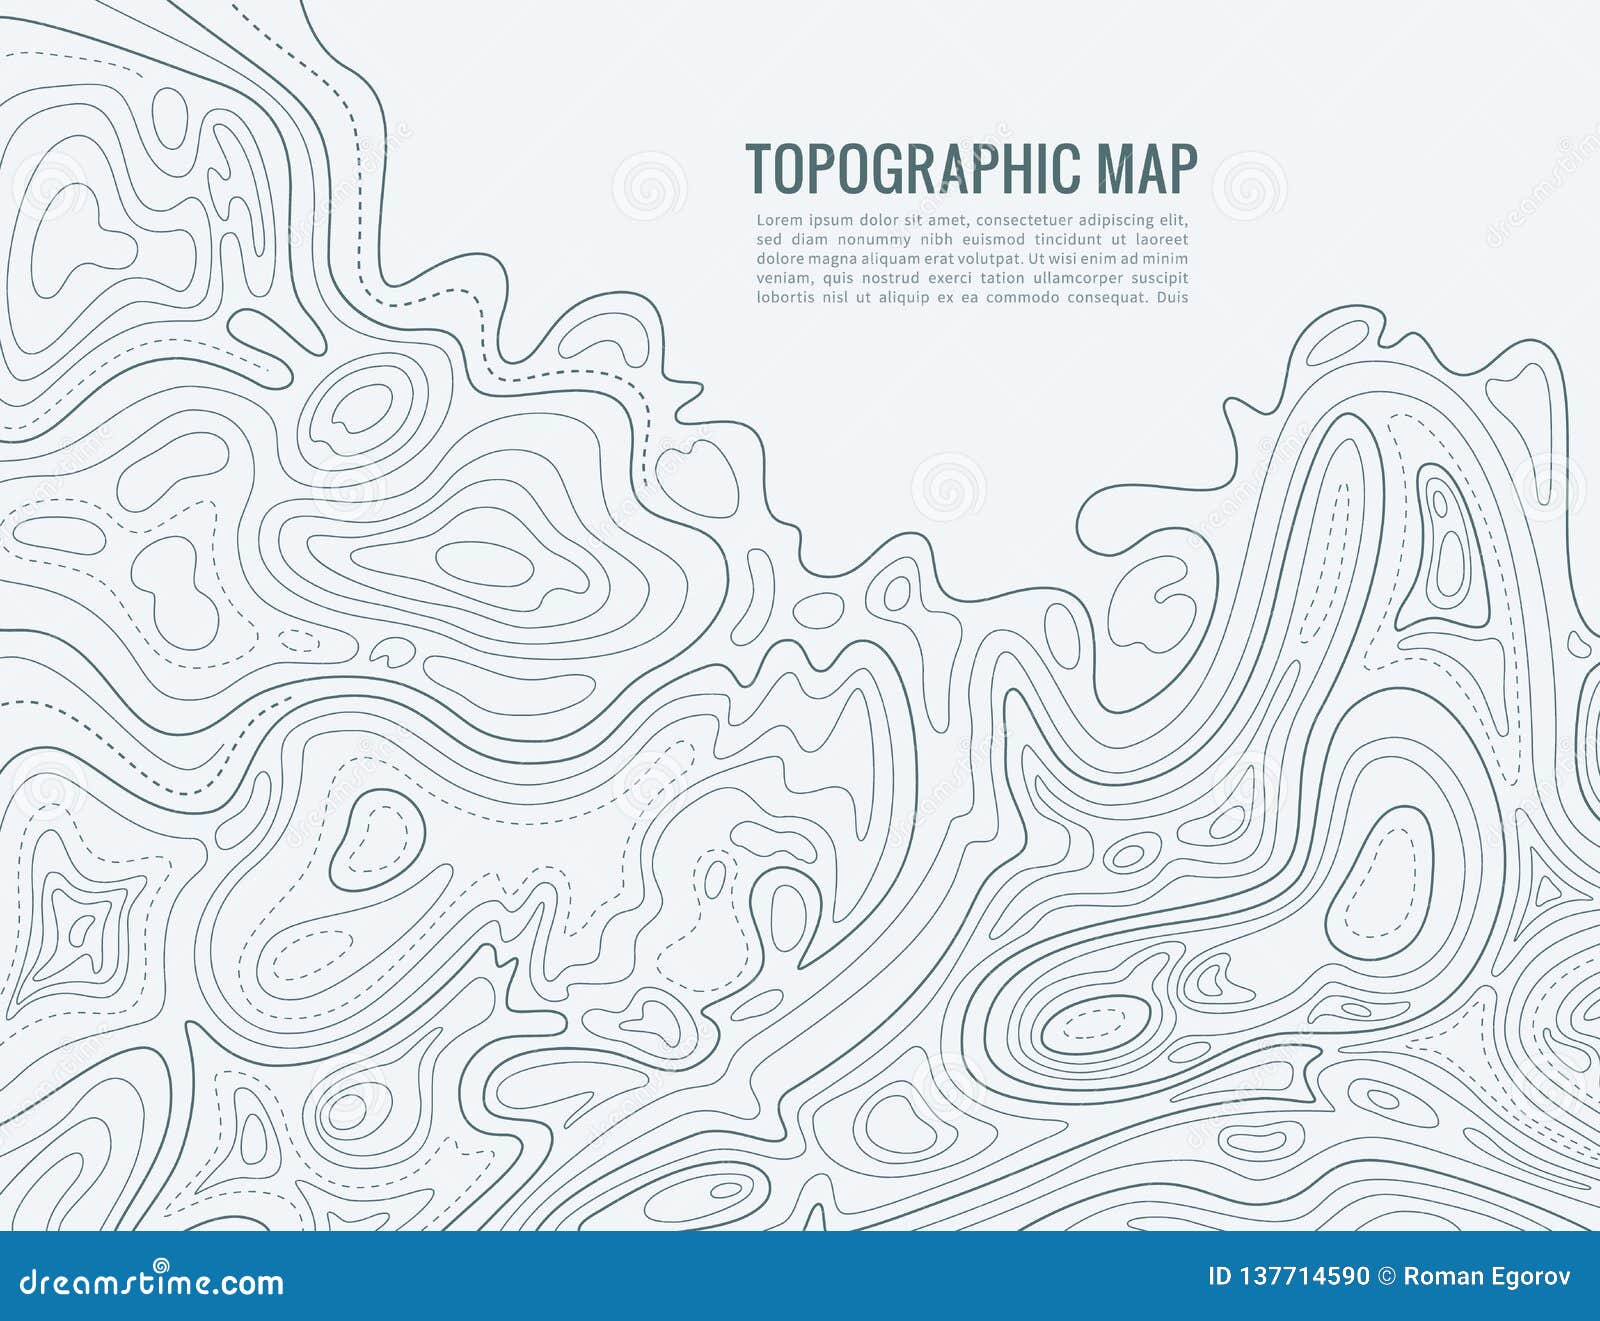 contour line map. elevation contouring outline cartography texture. topographical relief map background